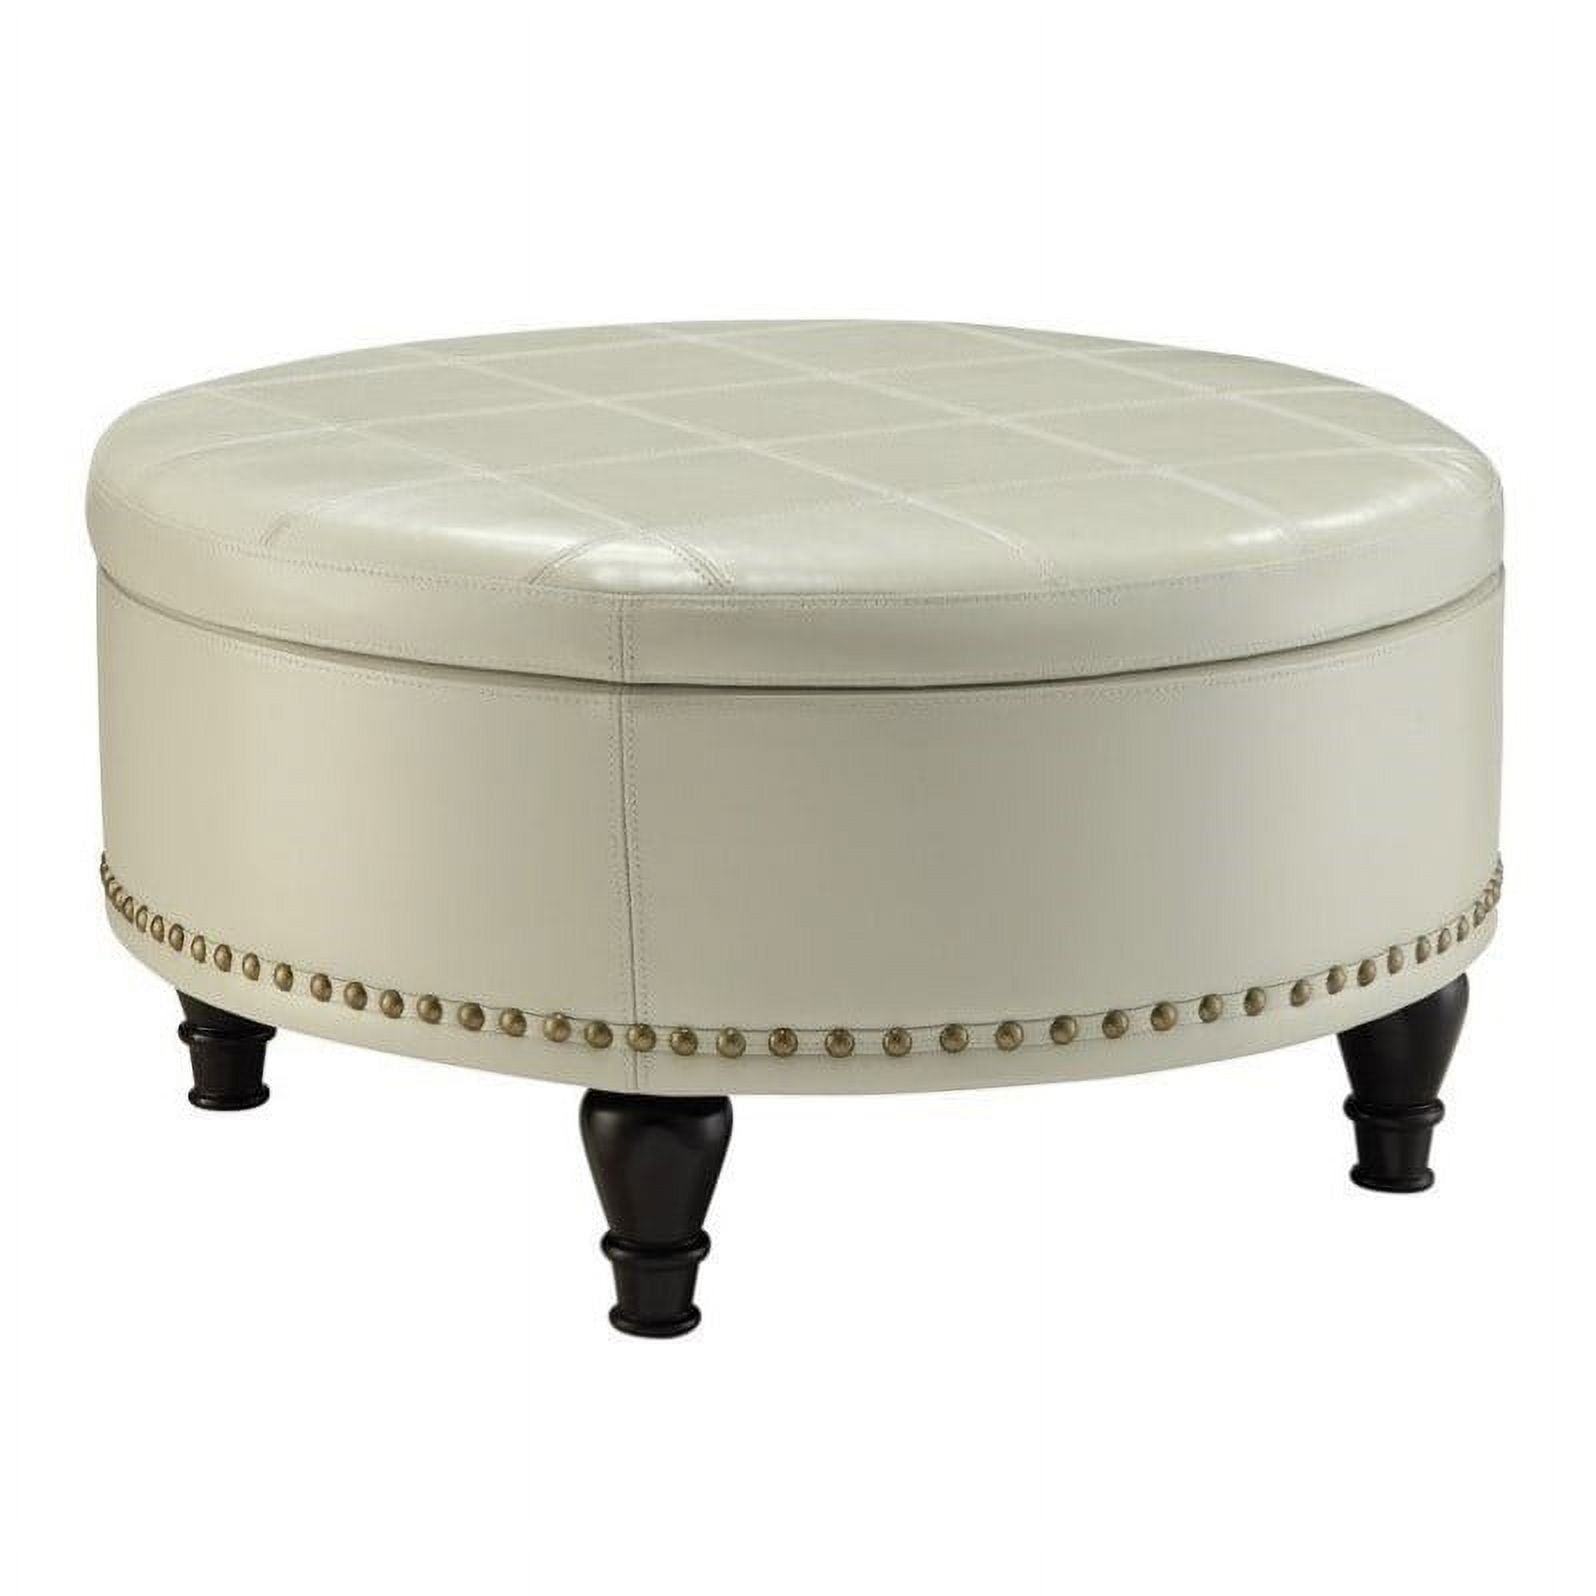 Augusta 33'' Round Storage Ottoman in Luxe Red Bonded Leather with Nailhead Accents